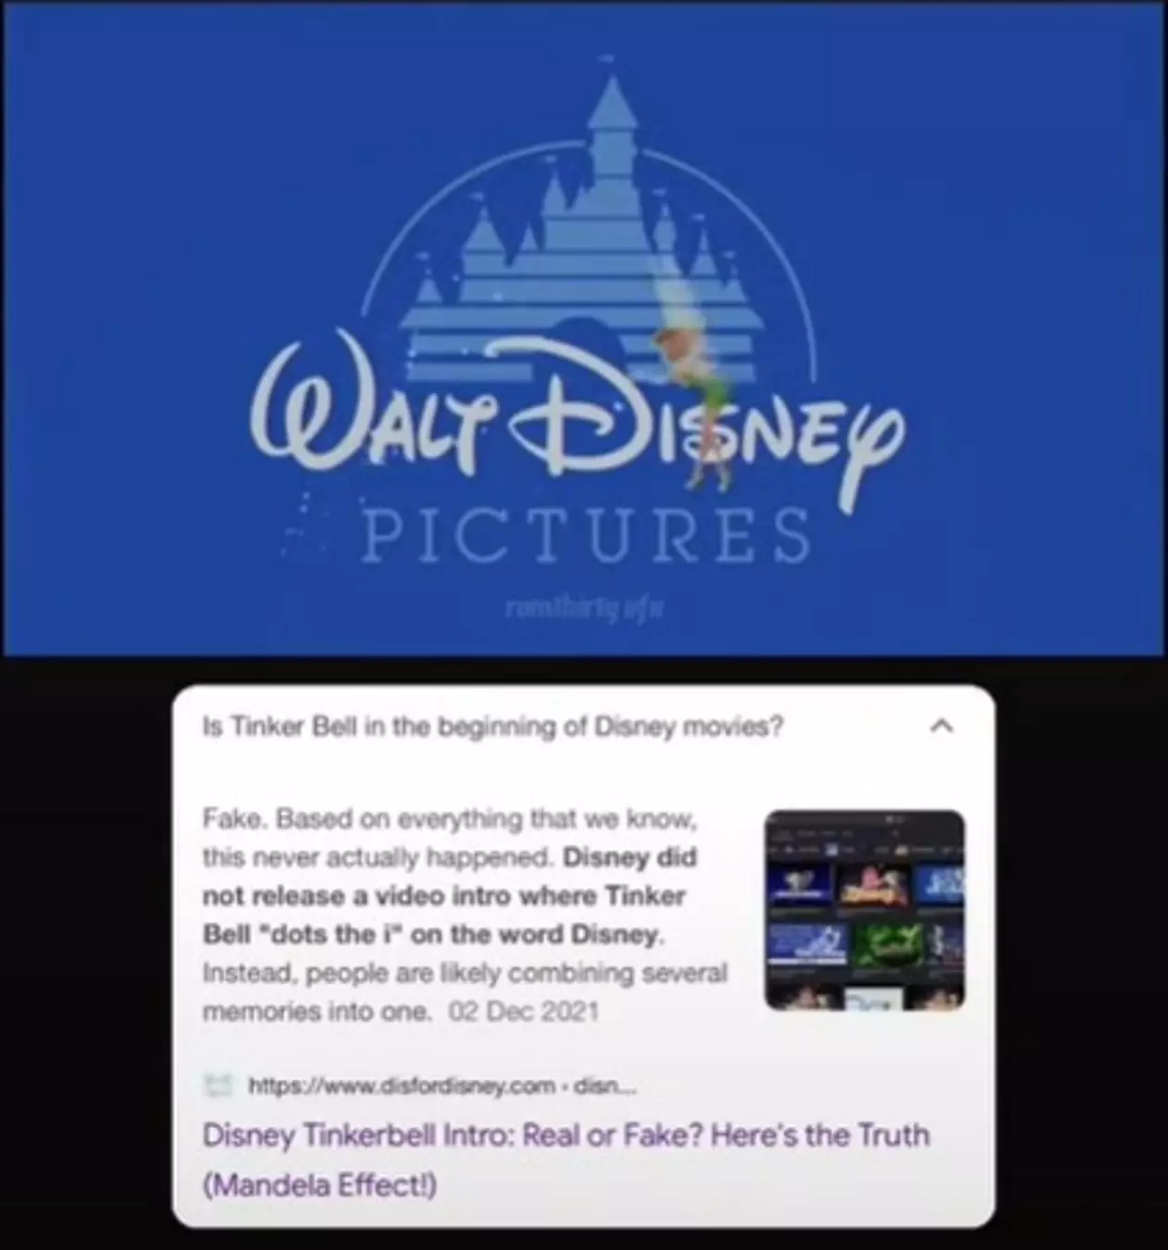 It's Not the Mandela Effect! Disney Actually Altered a Scene in